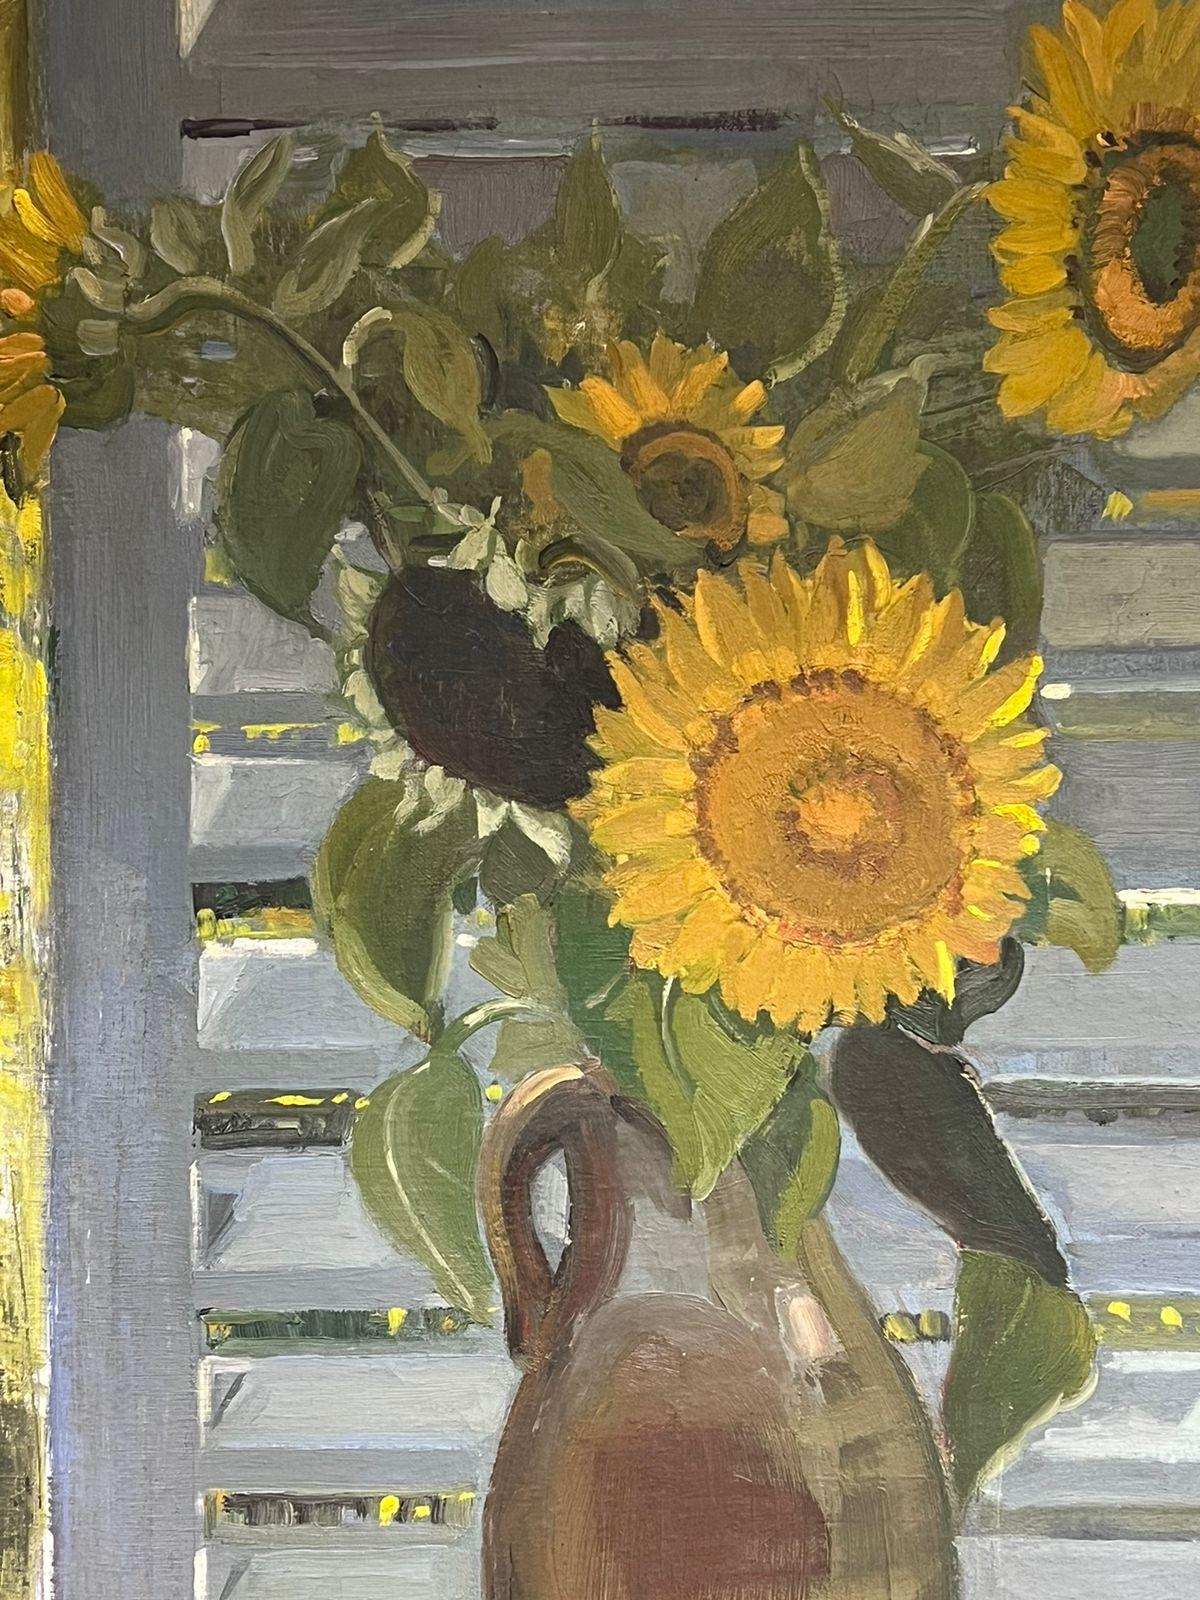 Huge 1930's French Signed Oil Sunflowers in Vase in Interior Windowsill Scene - Black Interior Painting by French School, 1930's